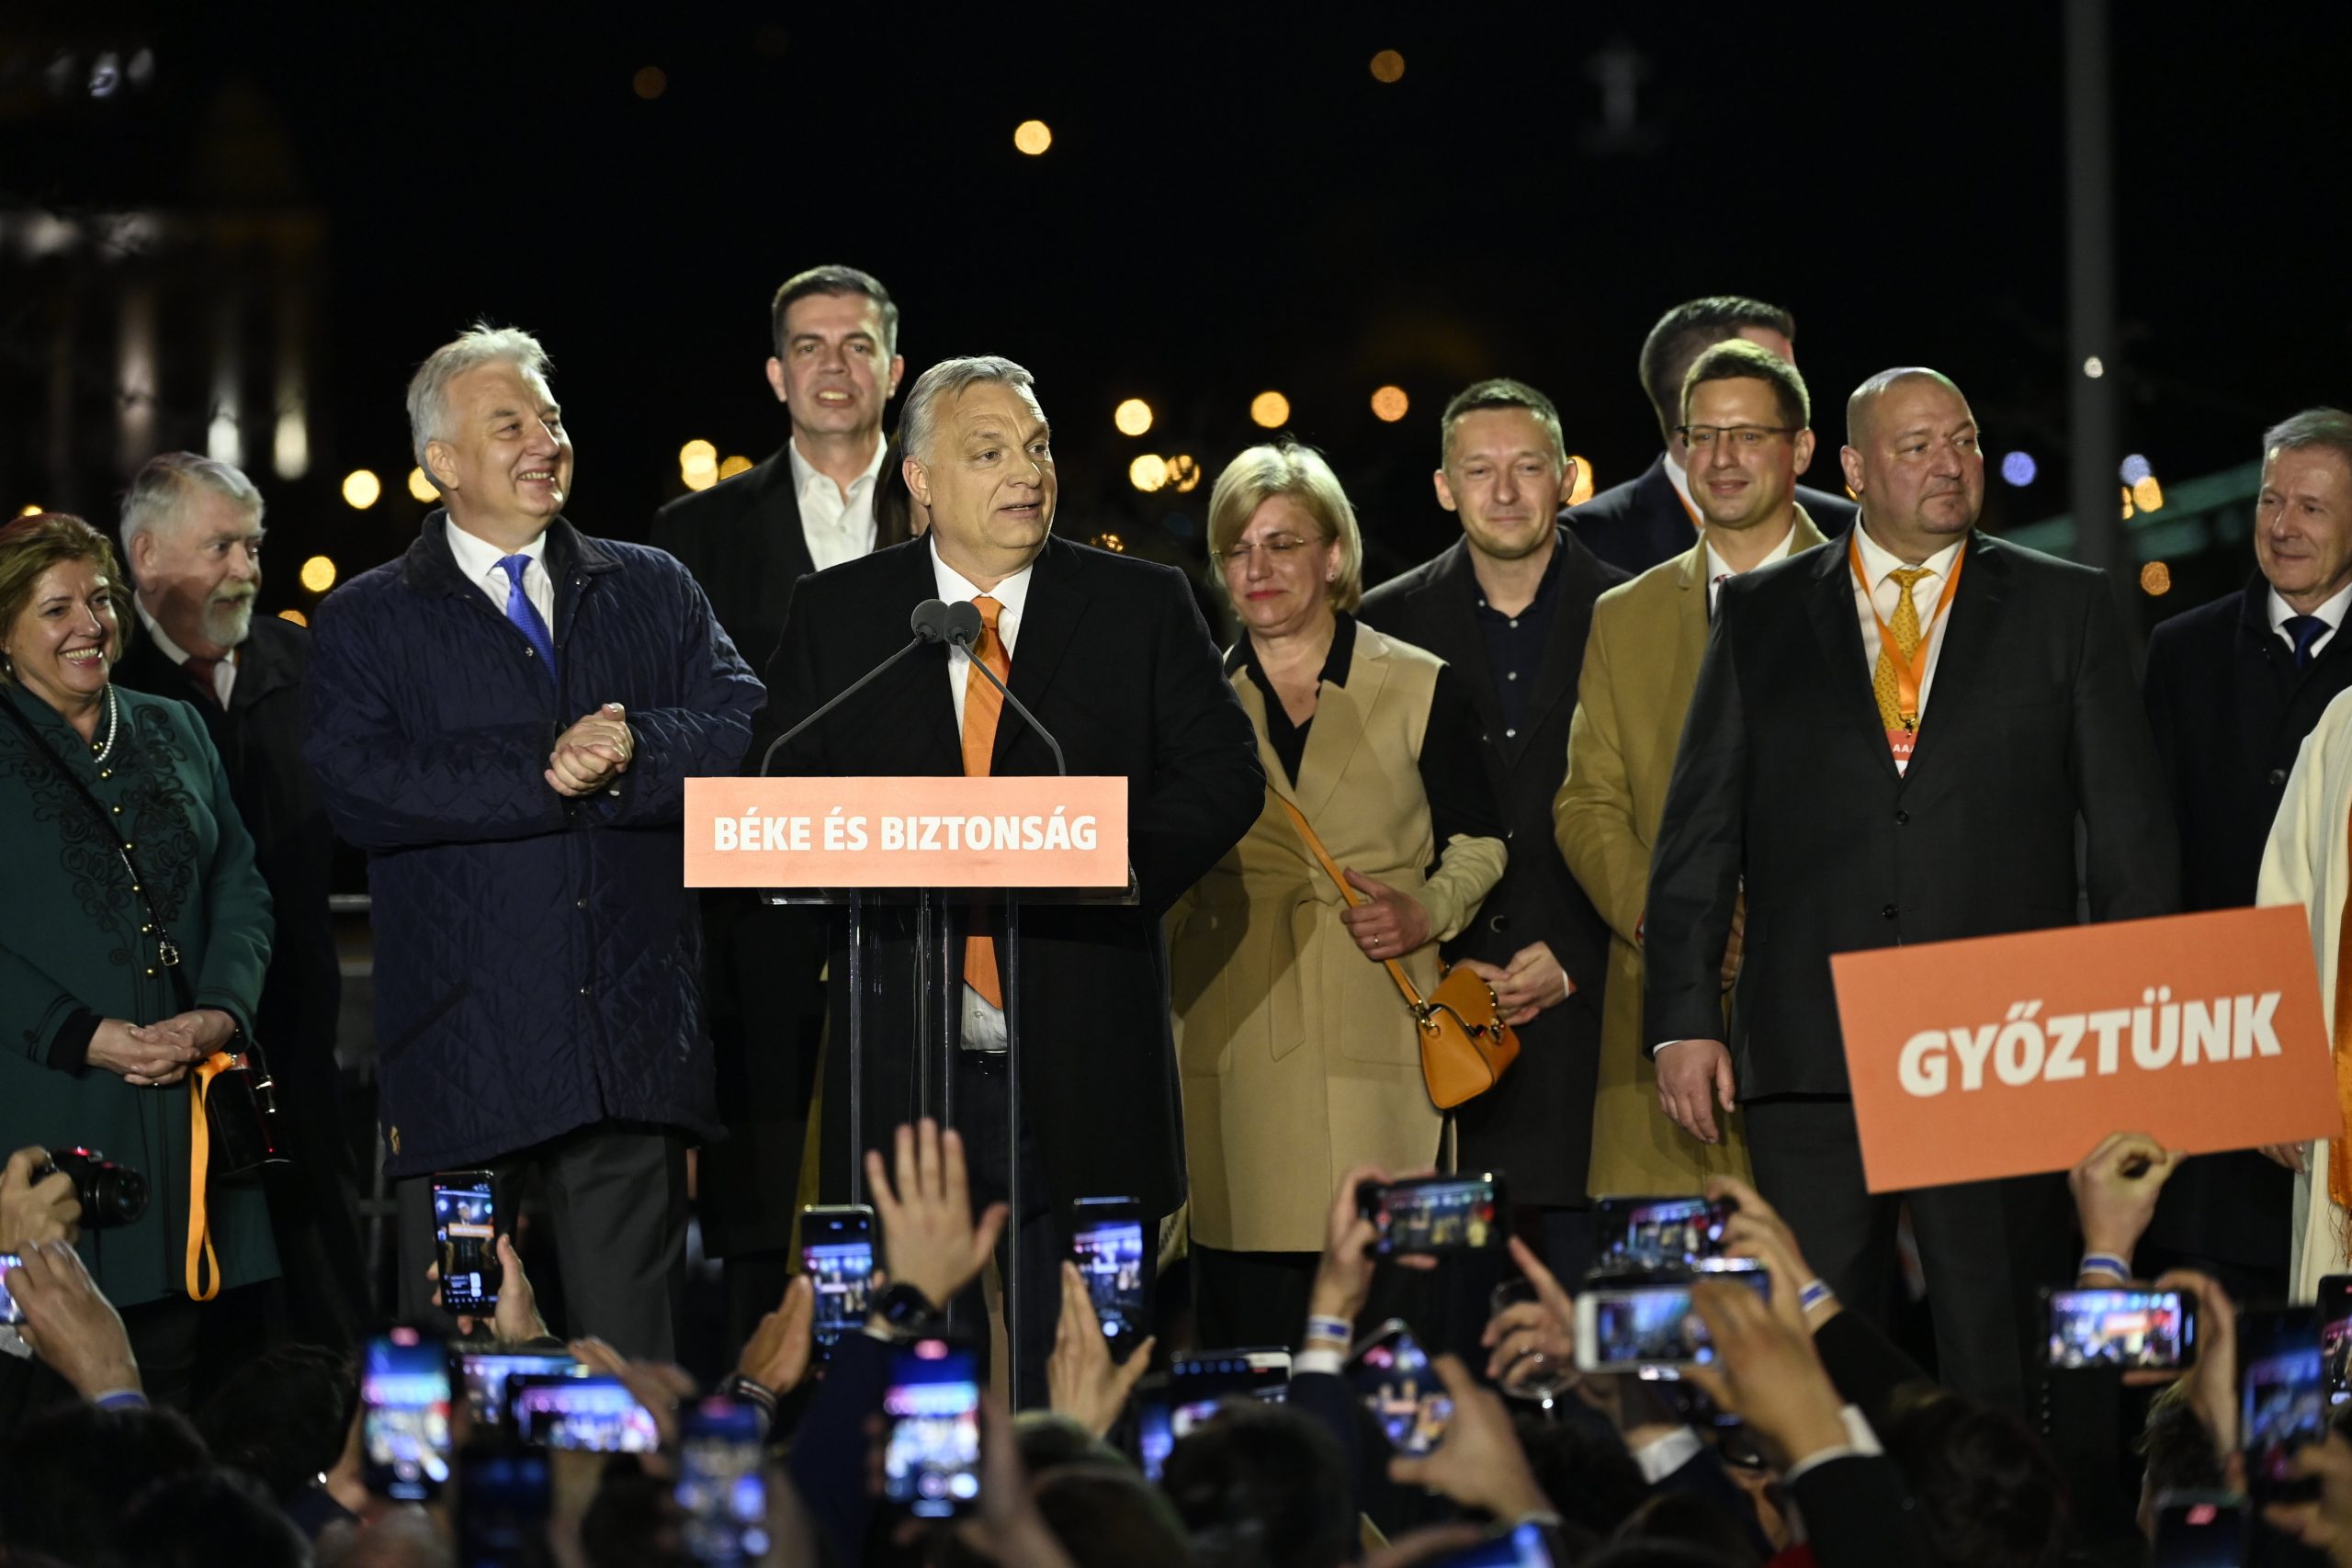 Press Roundup: Two-thirds Majority for Fidesz Confirmed